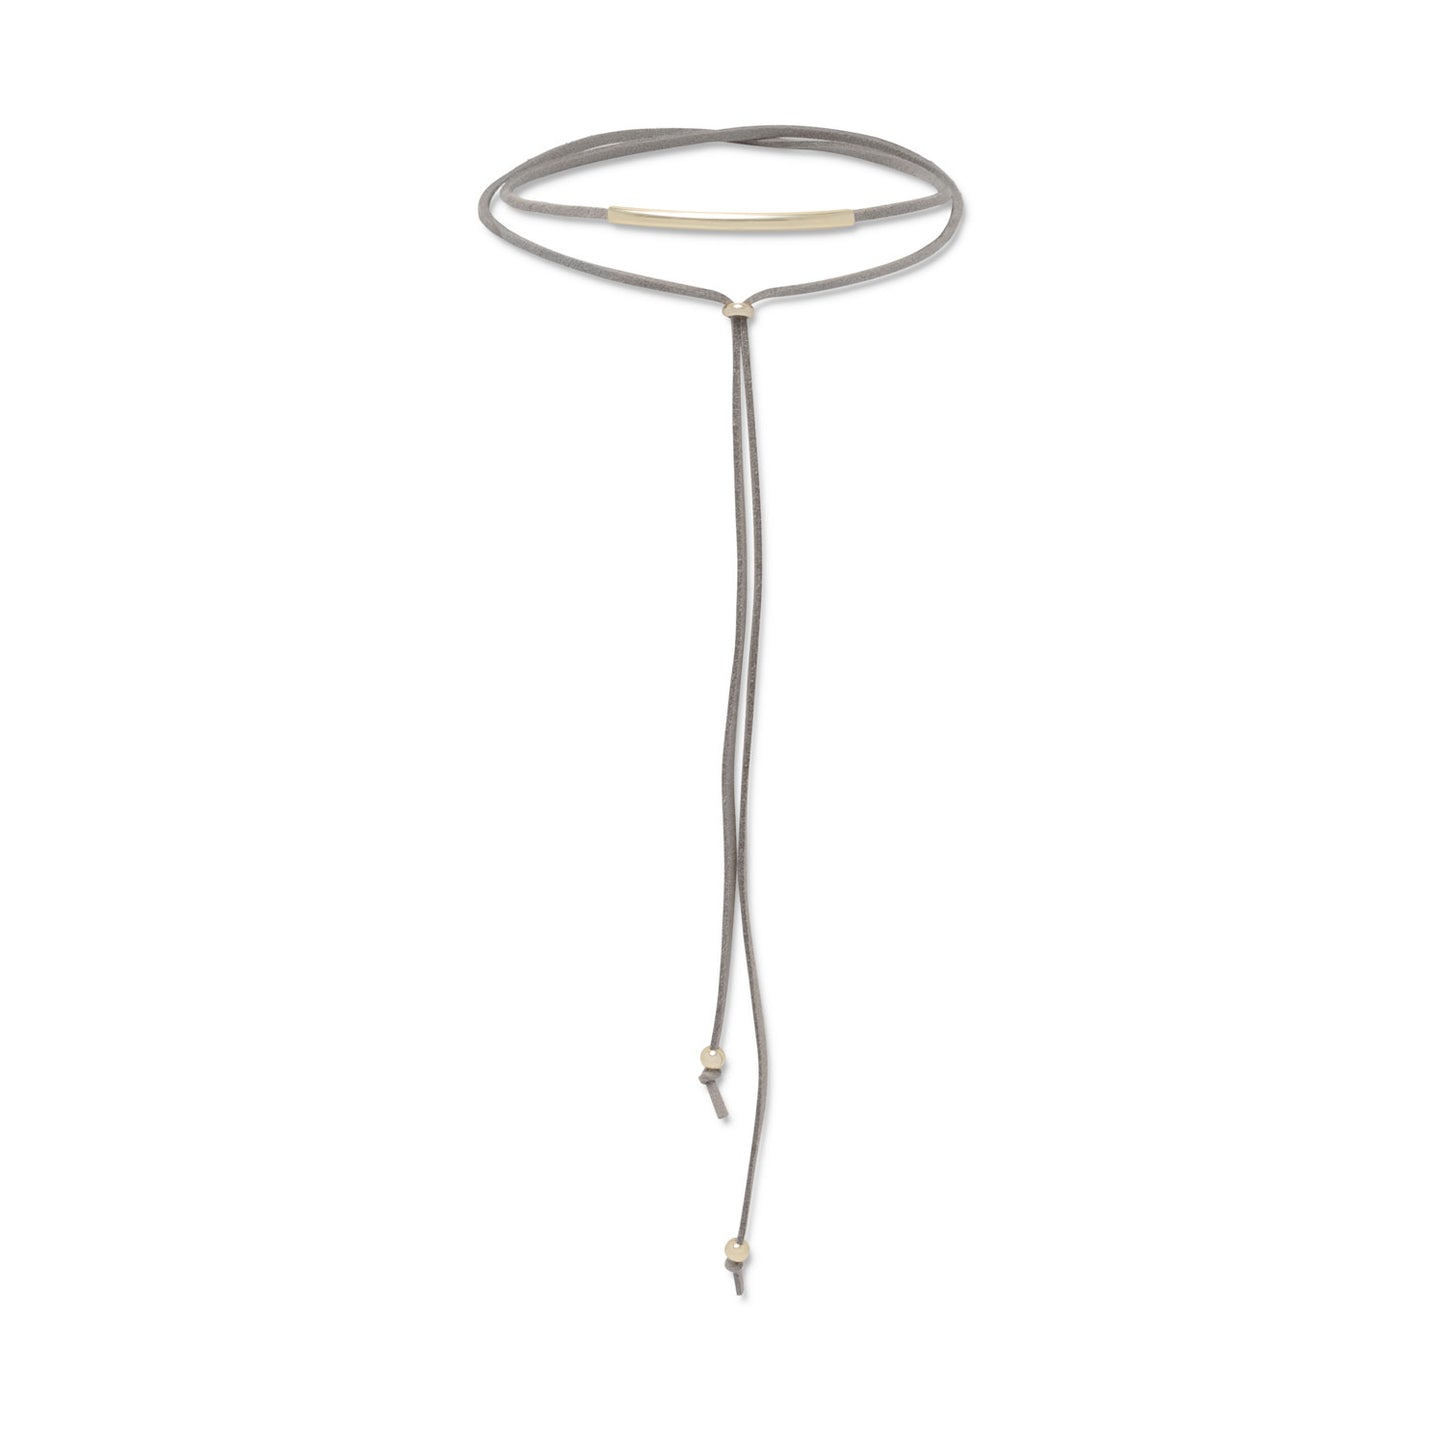 14k Goldplated Silver and Grey Suede Cord Bar Lariat Choker Necklace